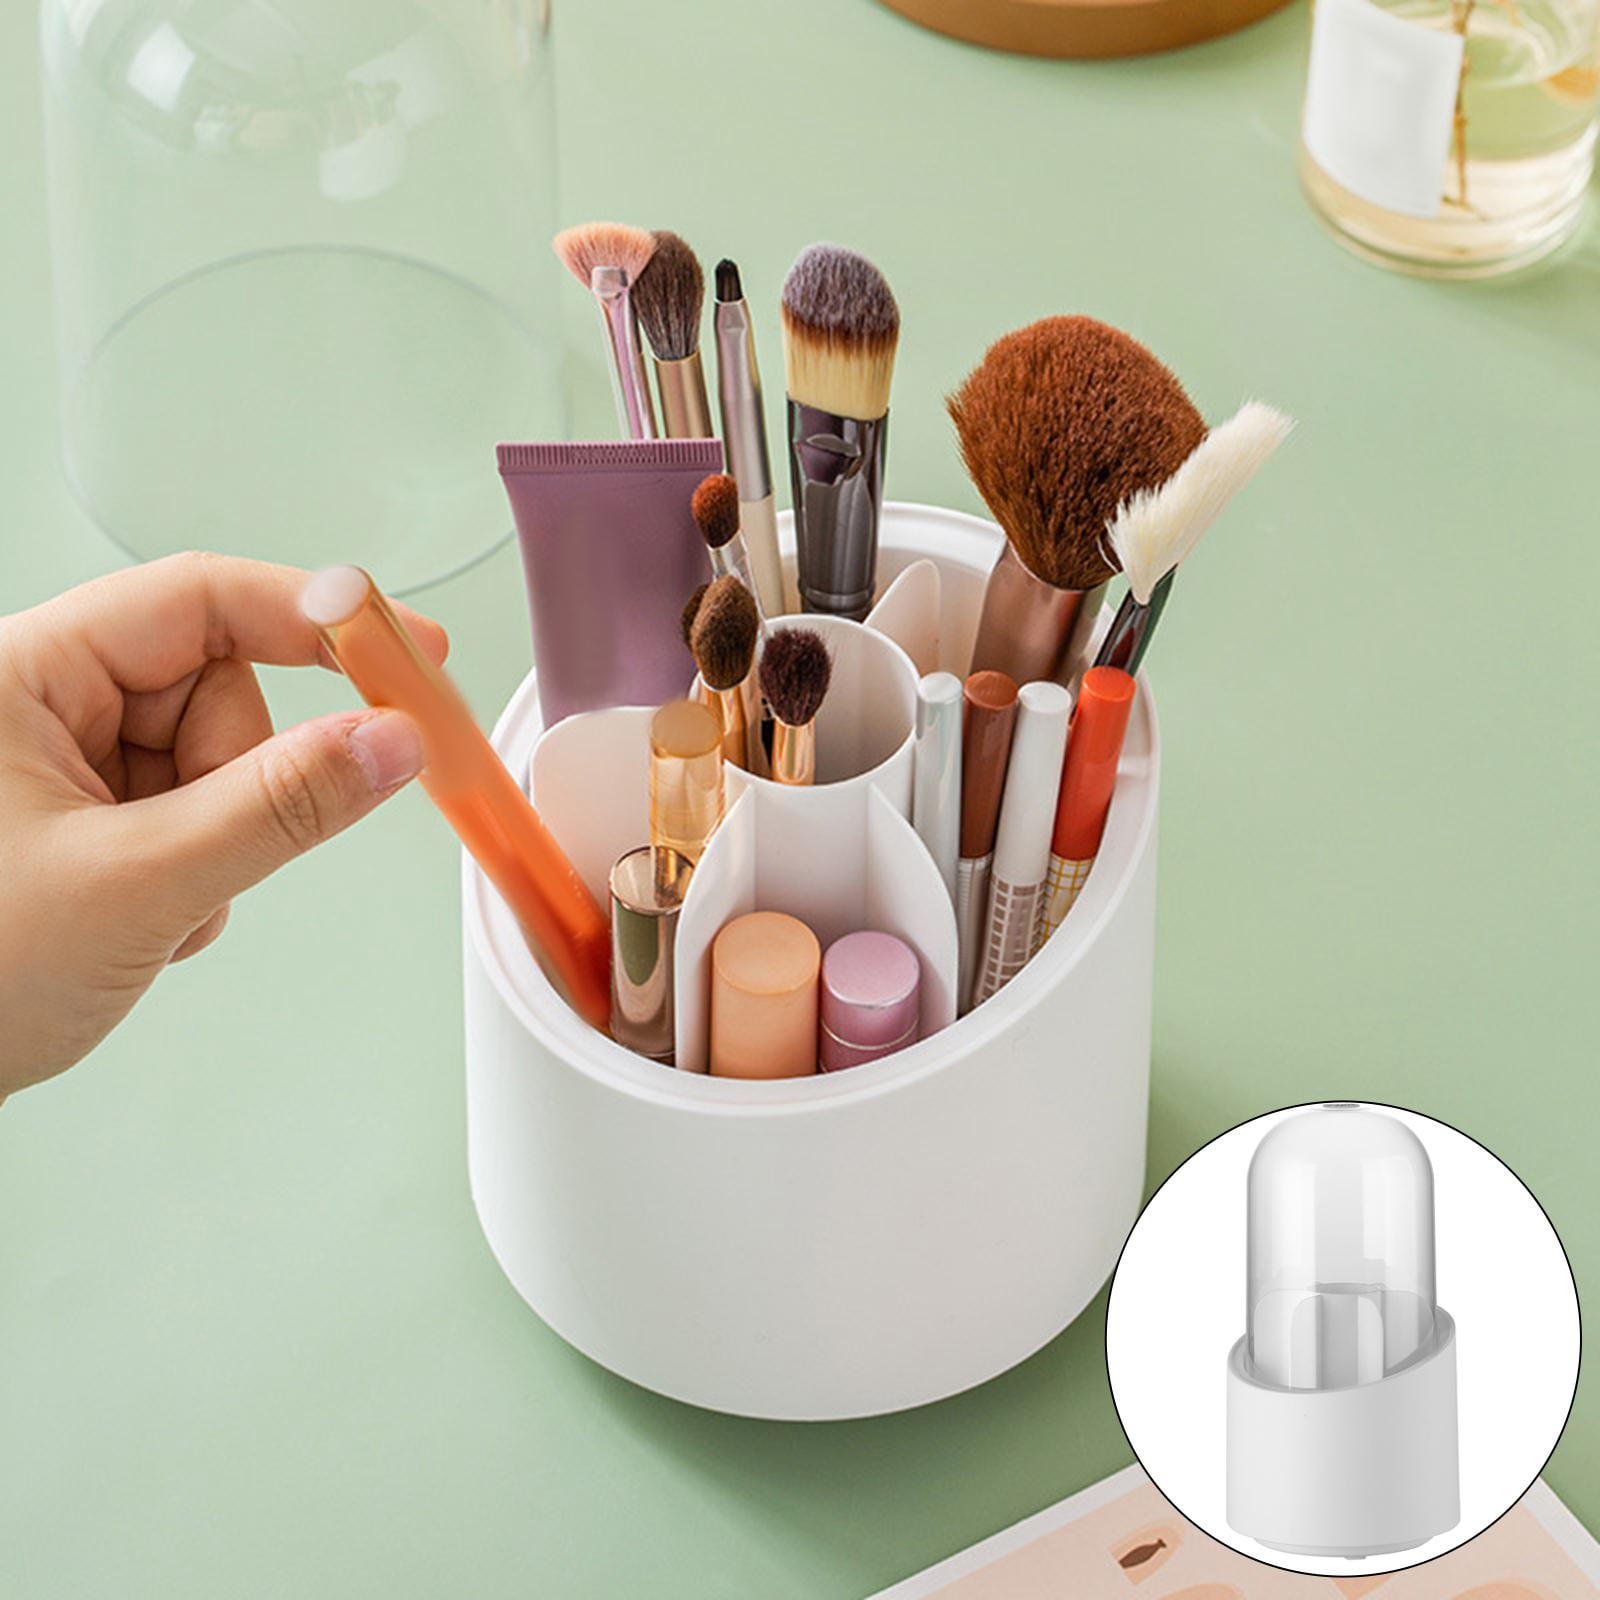 DYNWAVE Simple Rotating Makeup Brush Holder 6 Slots Multifunctional Vanity Storage Box Container for Comb Nail Bathroom Rack Dresser , White , 12x12x23.5cm